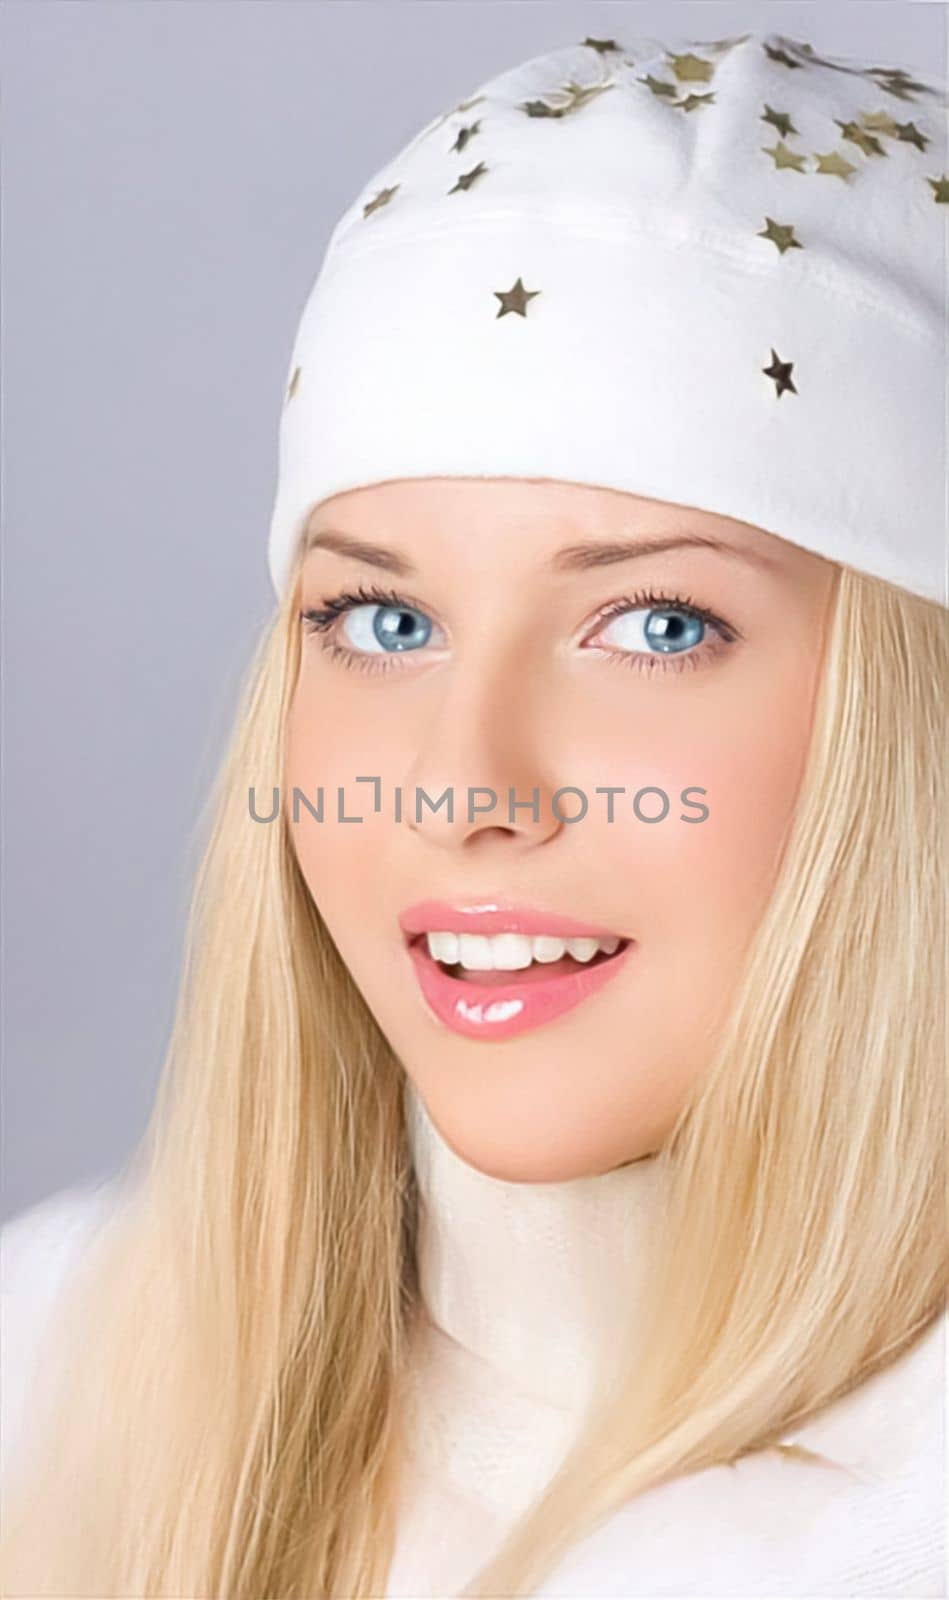 Happy holidays, Merry Christmas, and a lady wearing a white benny hat, joy, beauty, and elegance. Portrait of a beautiful blonde girl who is smiling and having fun during the winter holidays, Christmas and New Year.